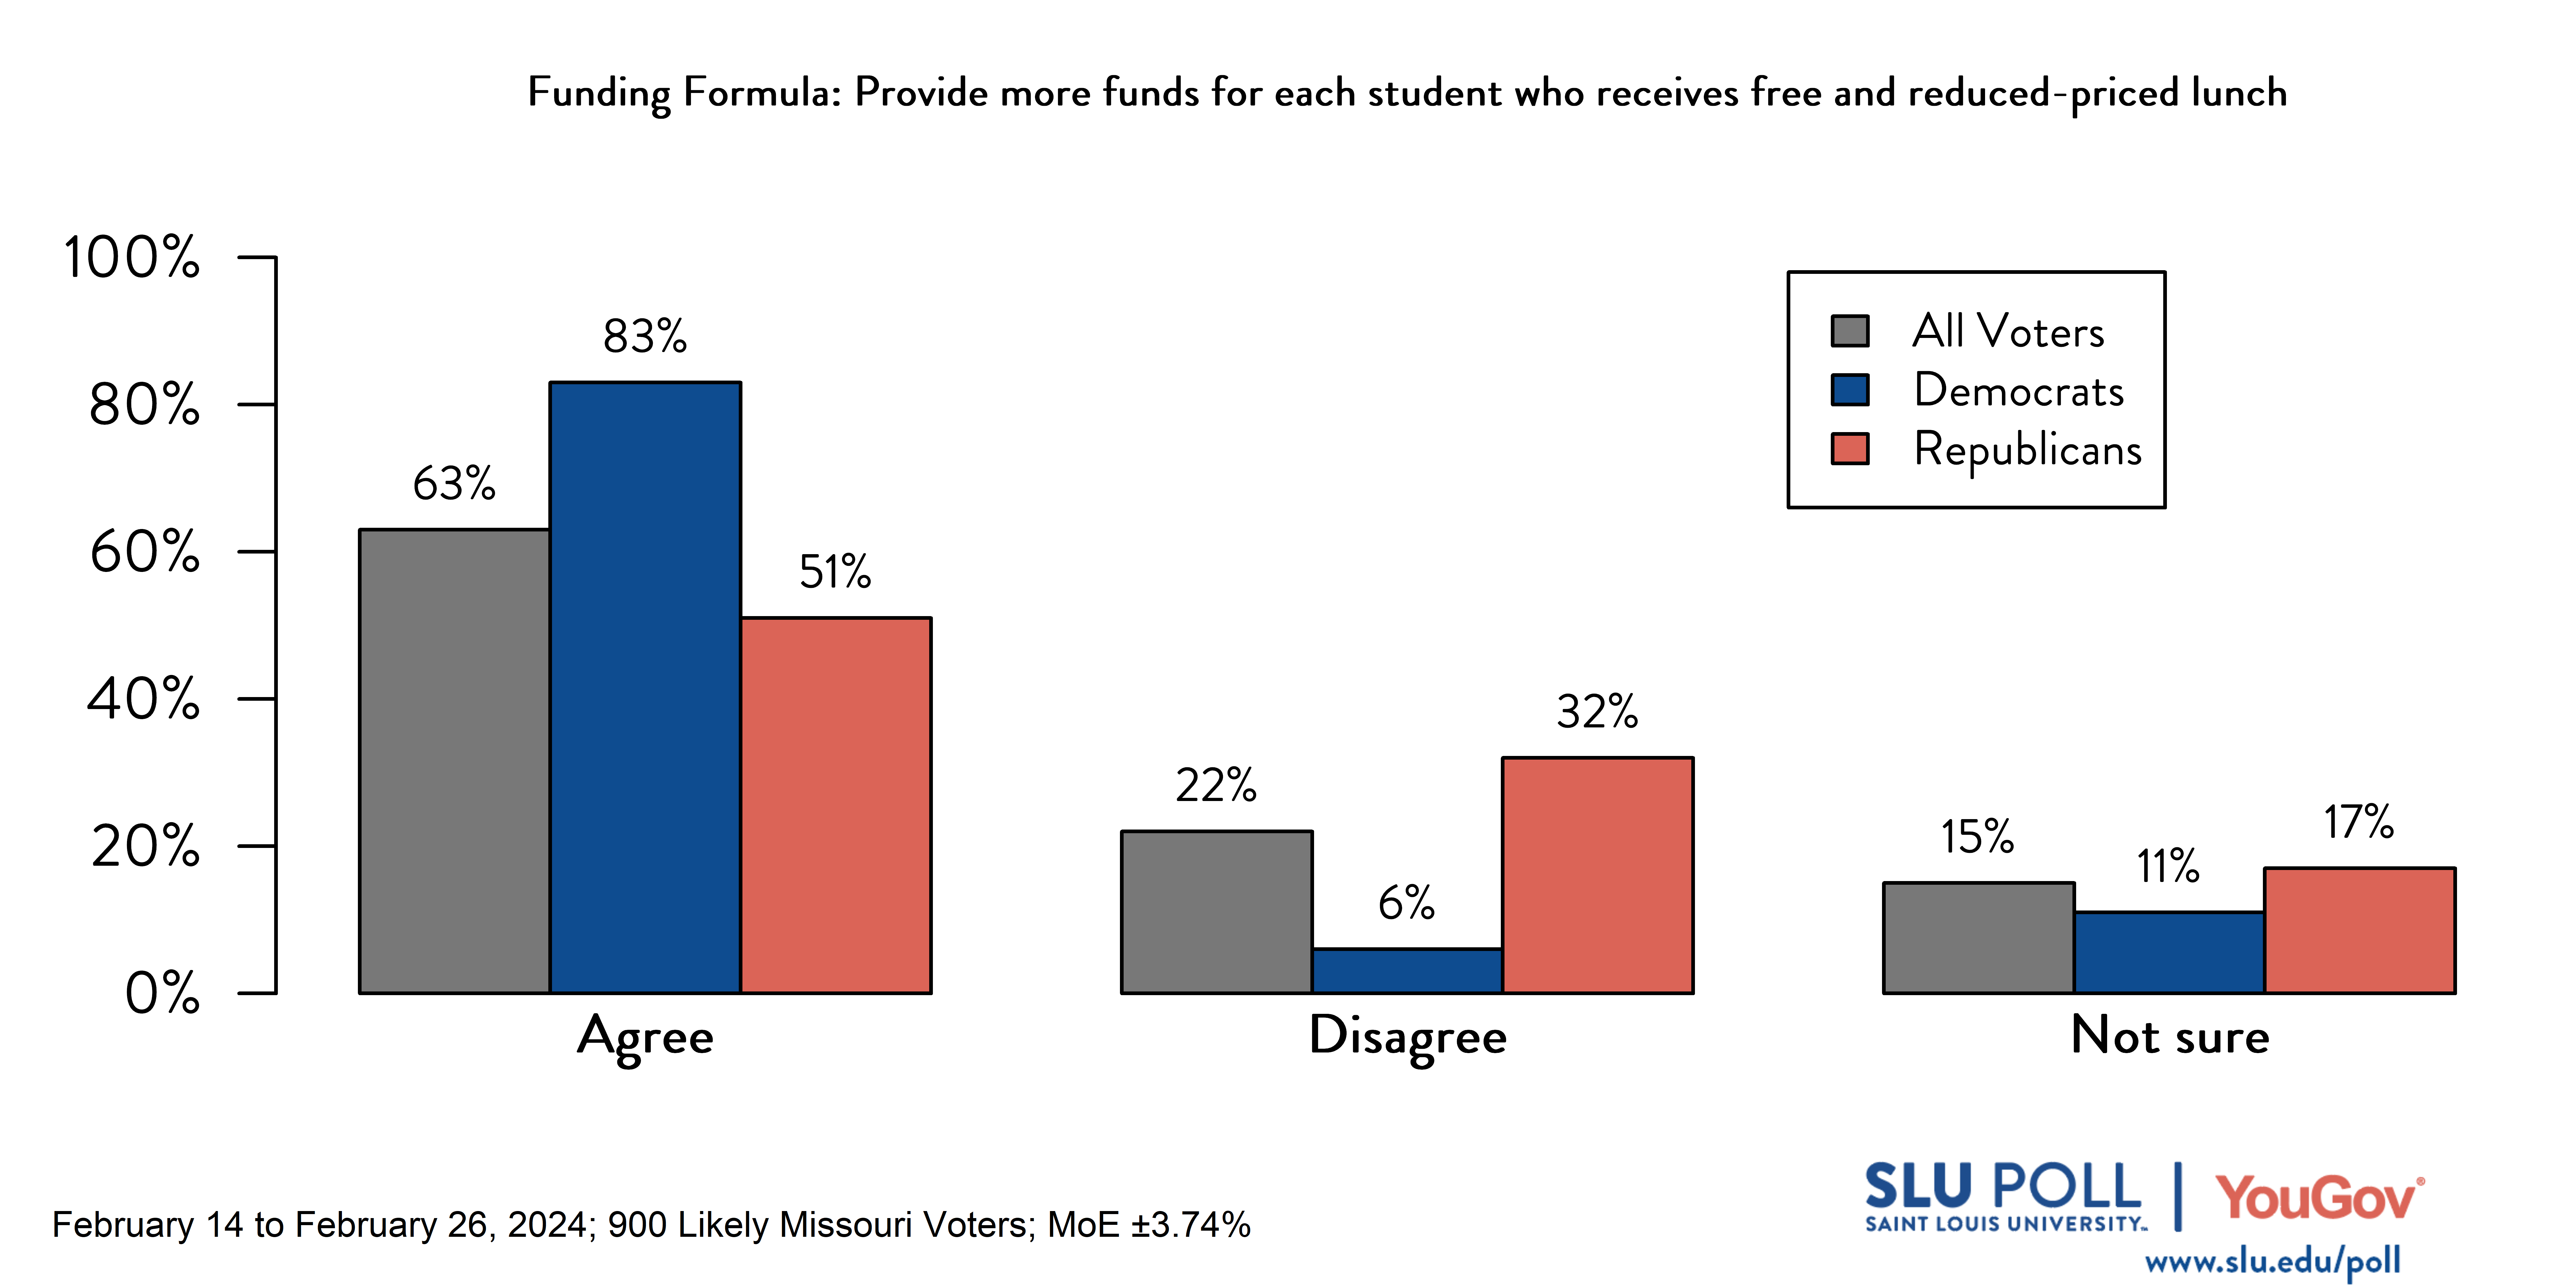 bar graph with SLU/YouGov Poll results for school funding formula free lunch question. Results in caption